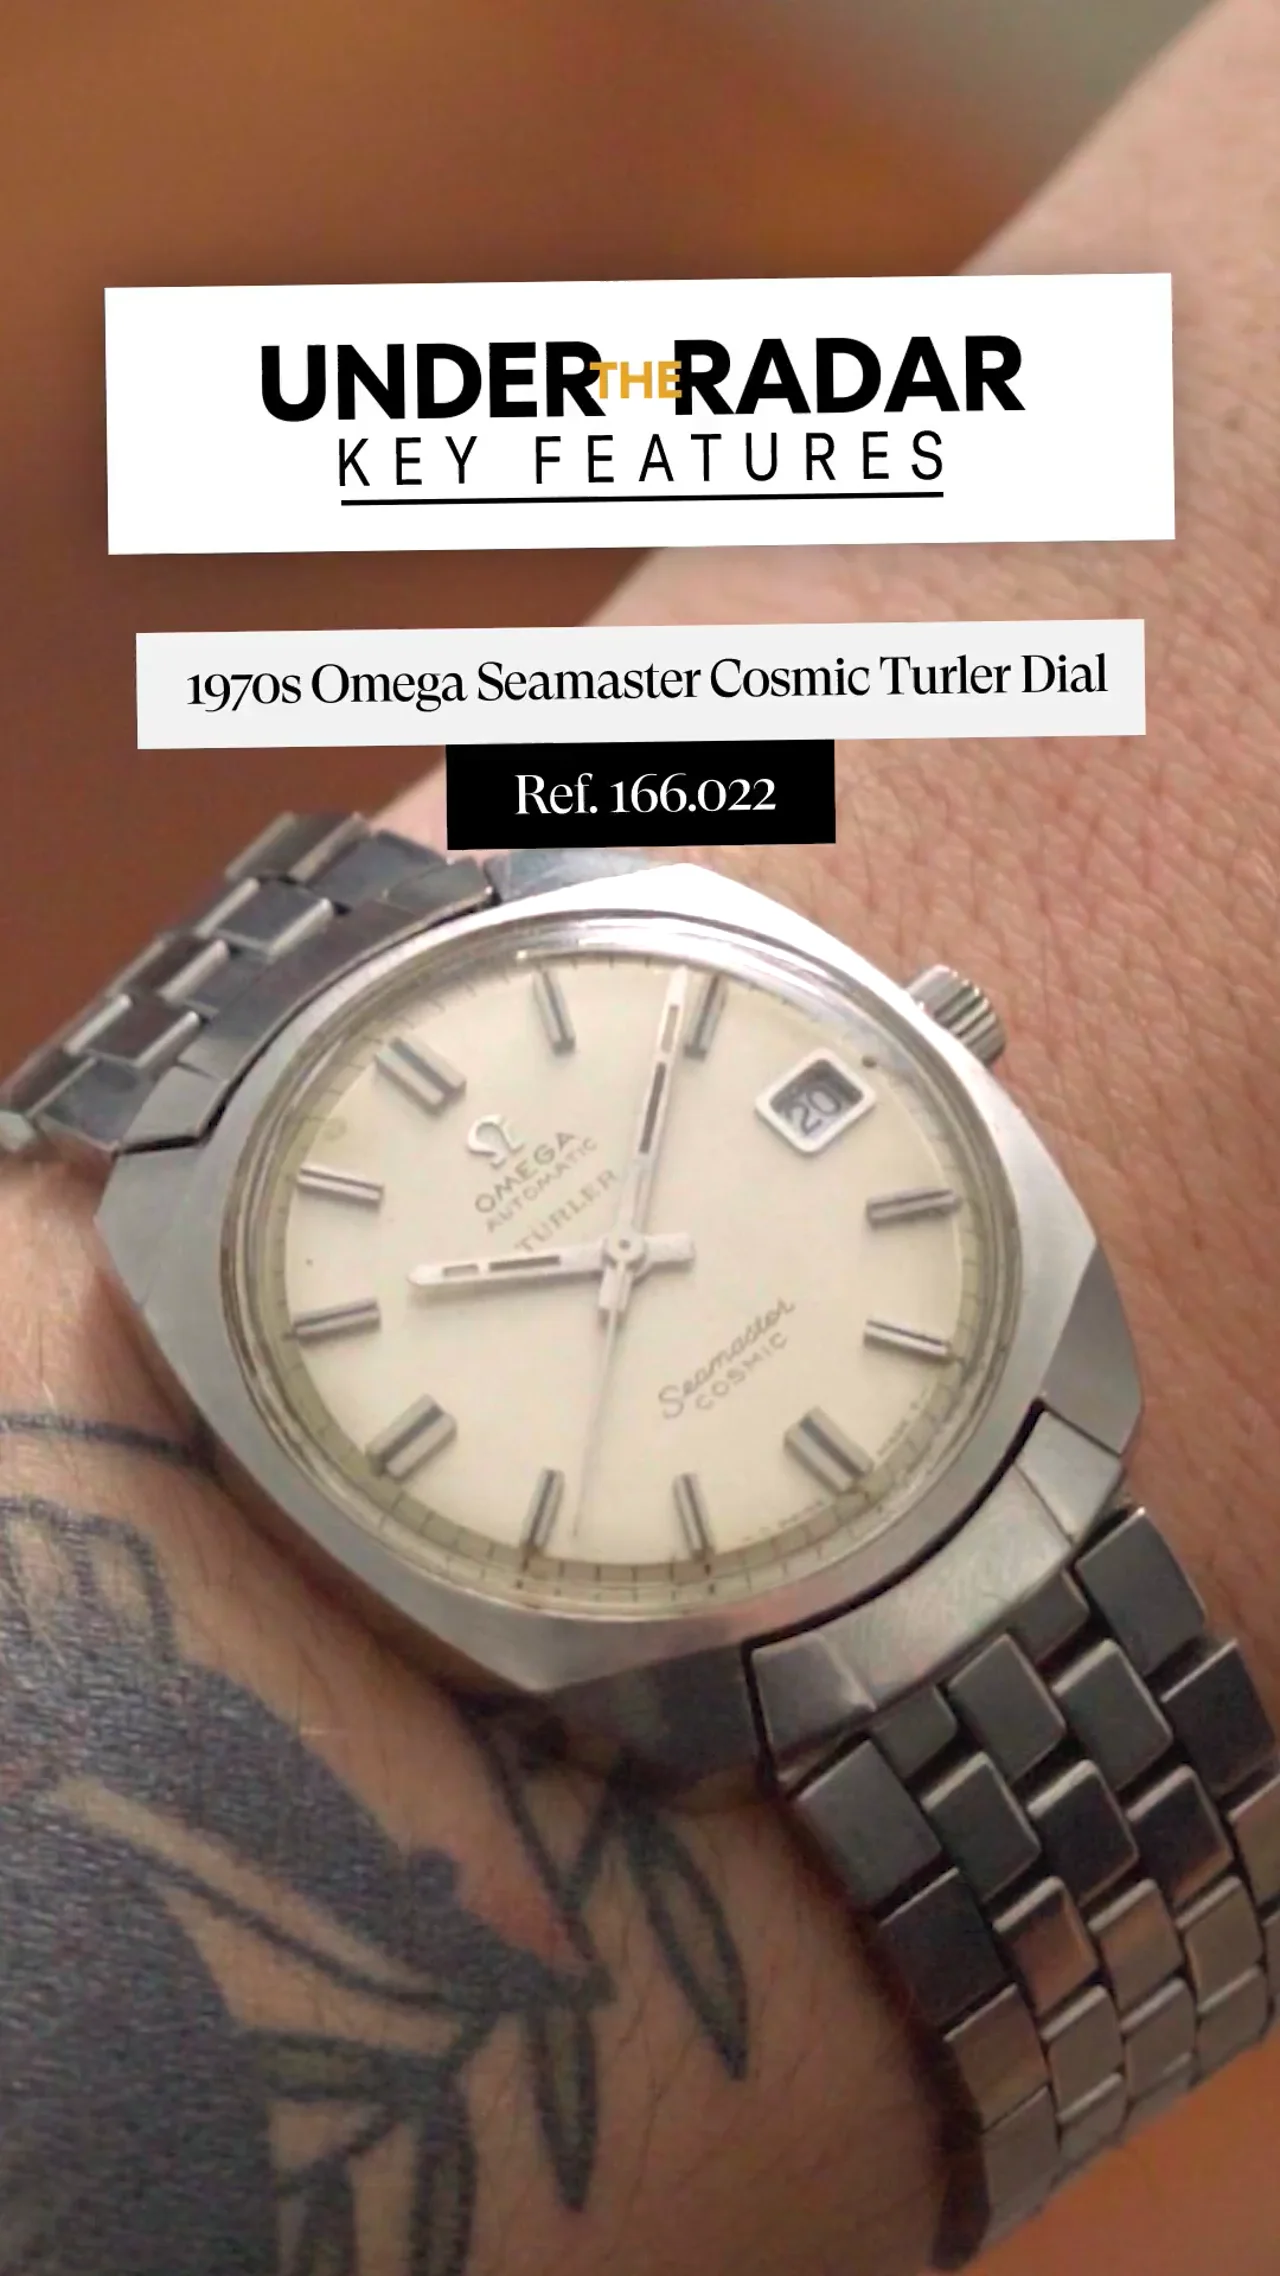 1970s Omega Seamaster Cosmic Turler Dial Ref. 166.022 "Key Features" Social 9x16